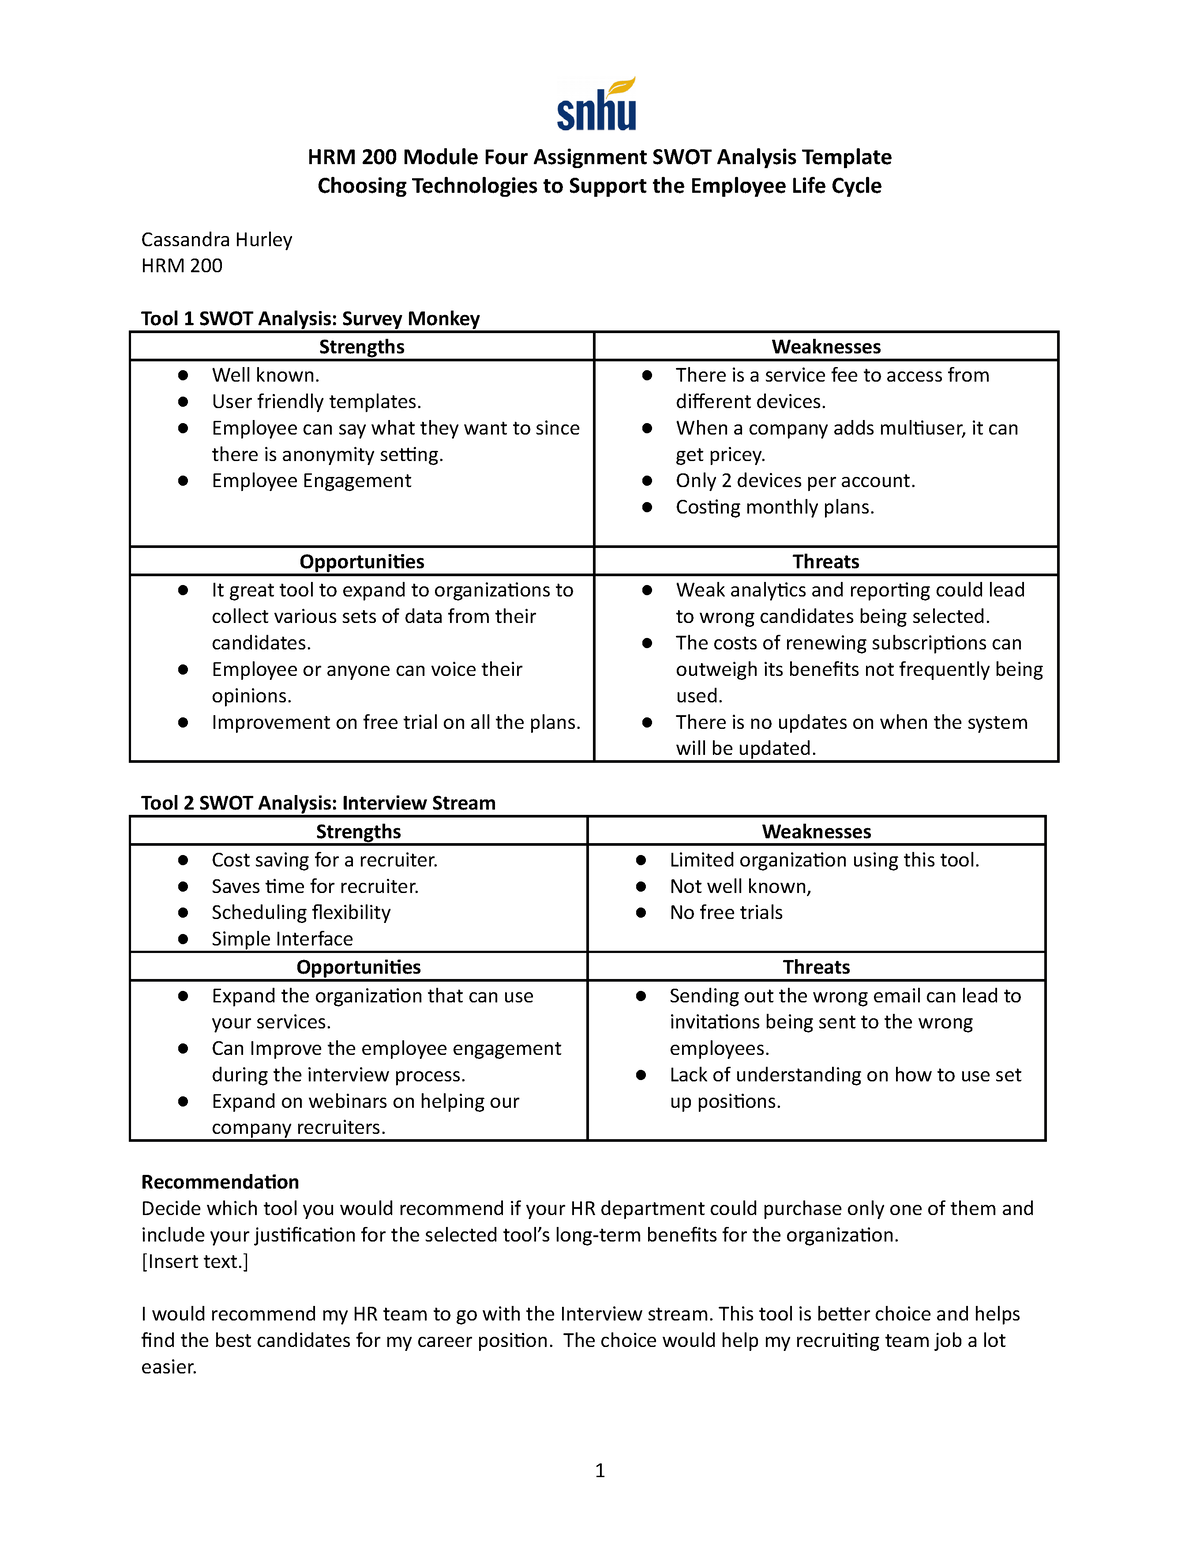 module four assignment guidelines and rubric